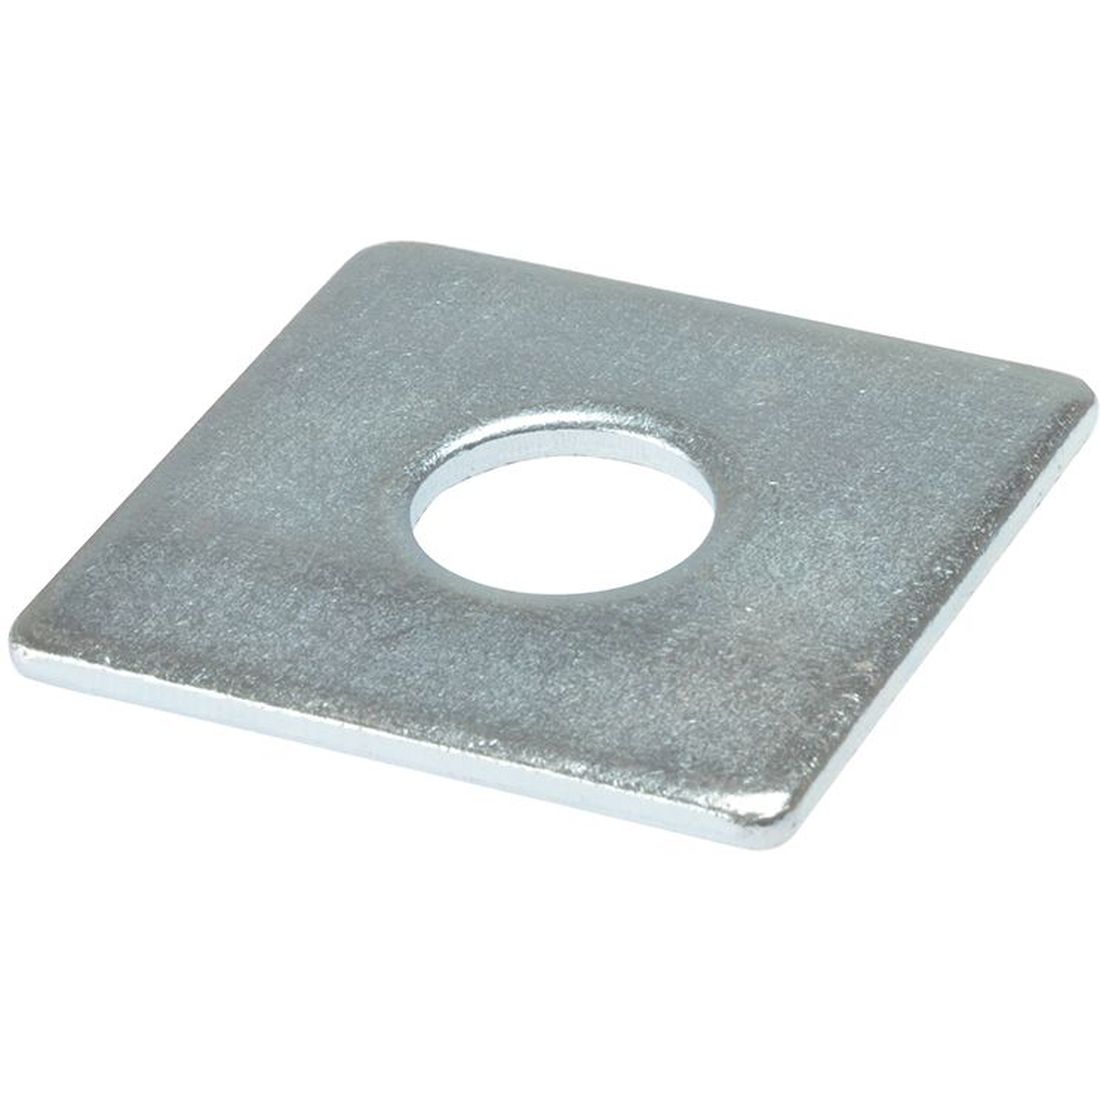 ForgeFix Square Plate Washer ZP 50 x 50 x 16mm Bag 10                                    